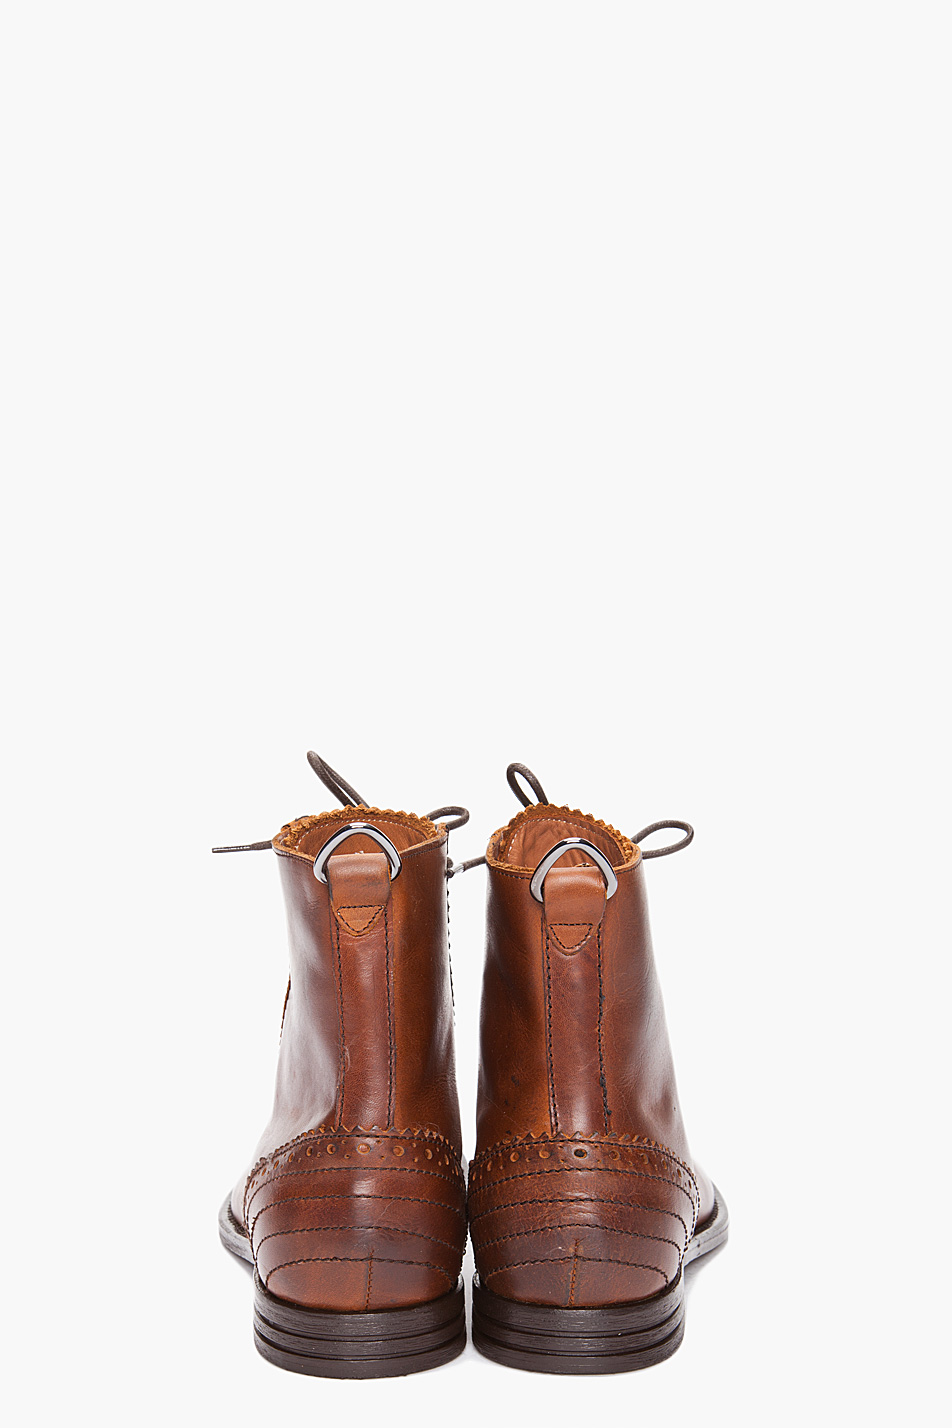 McQ Brogue Boots in Tan (Brown) for Men - Lyst